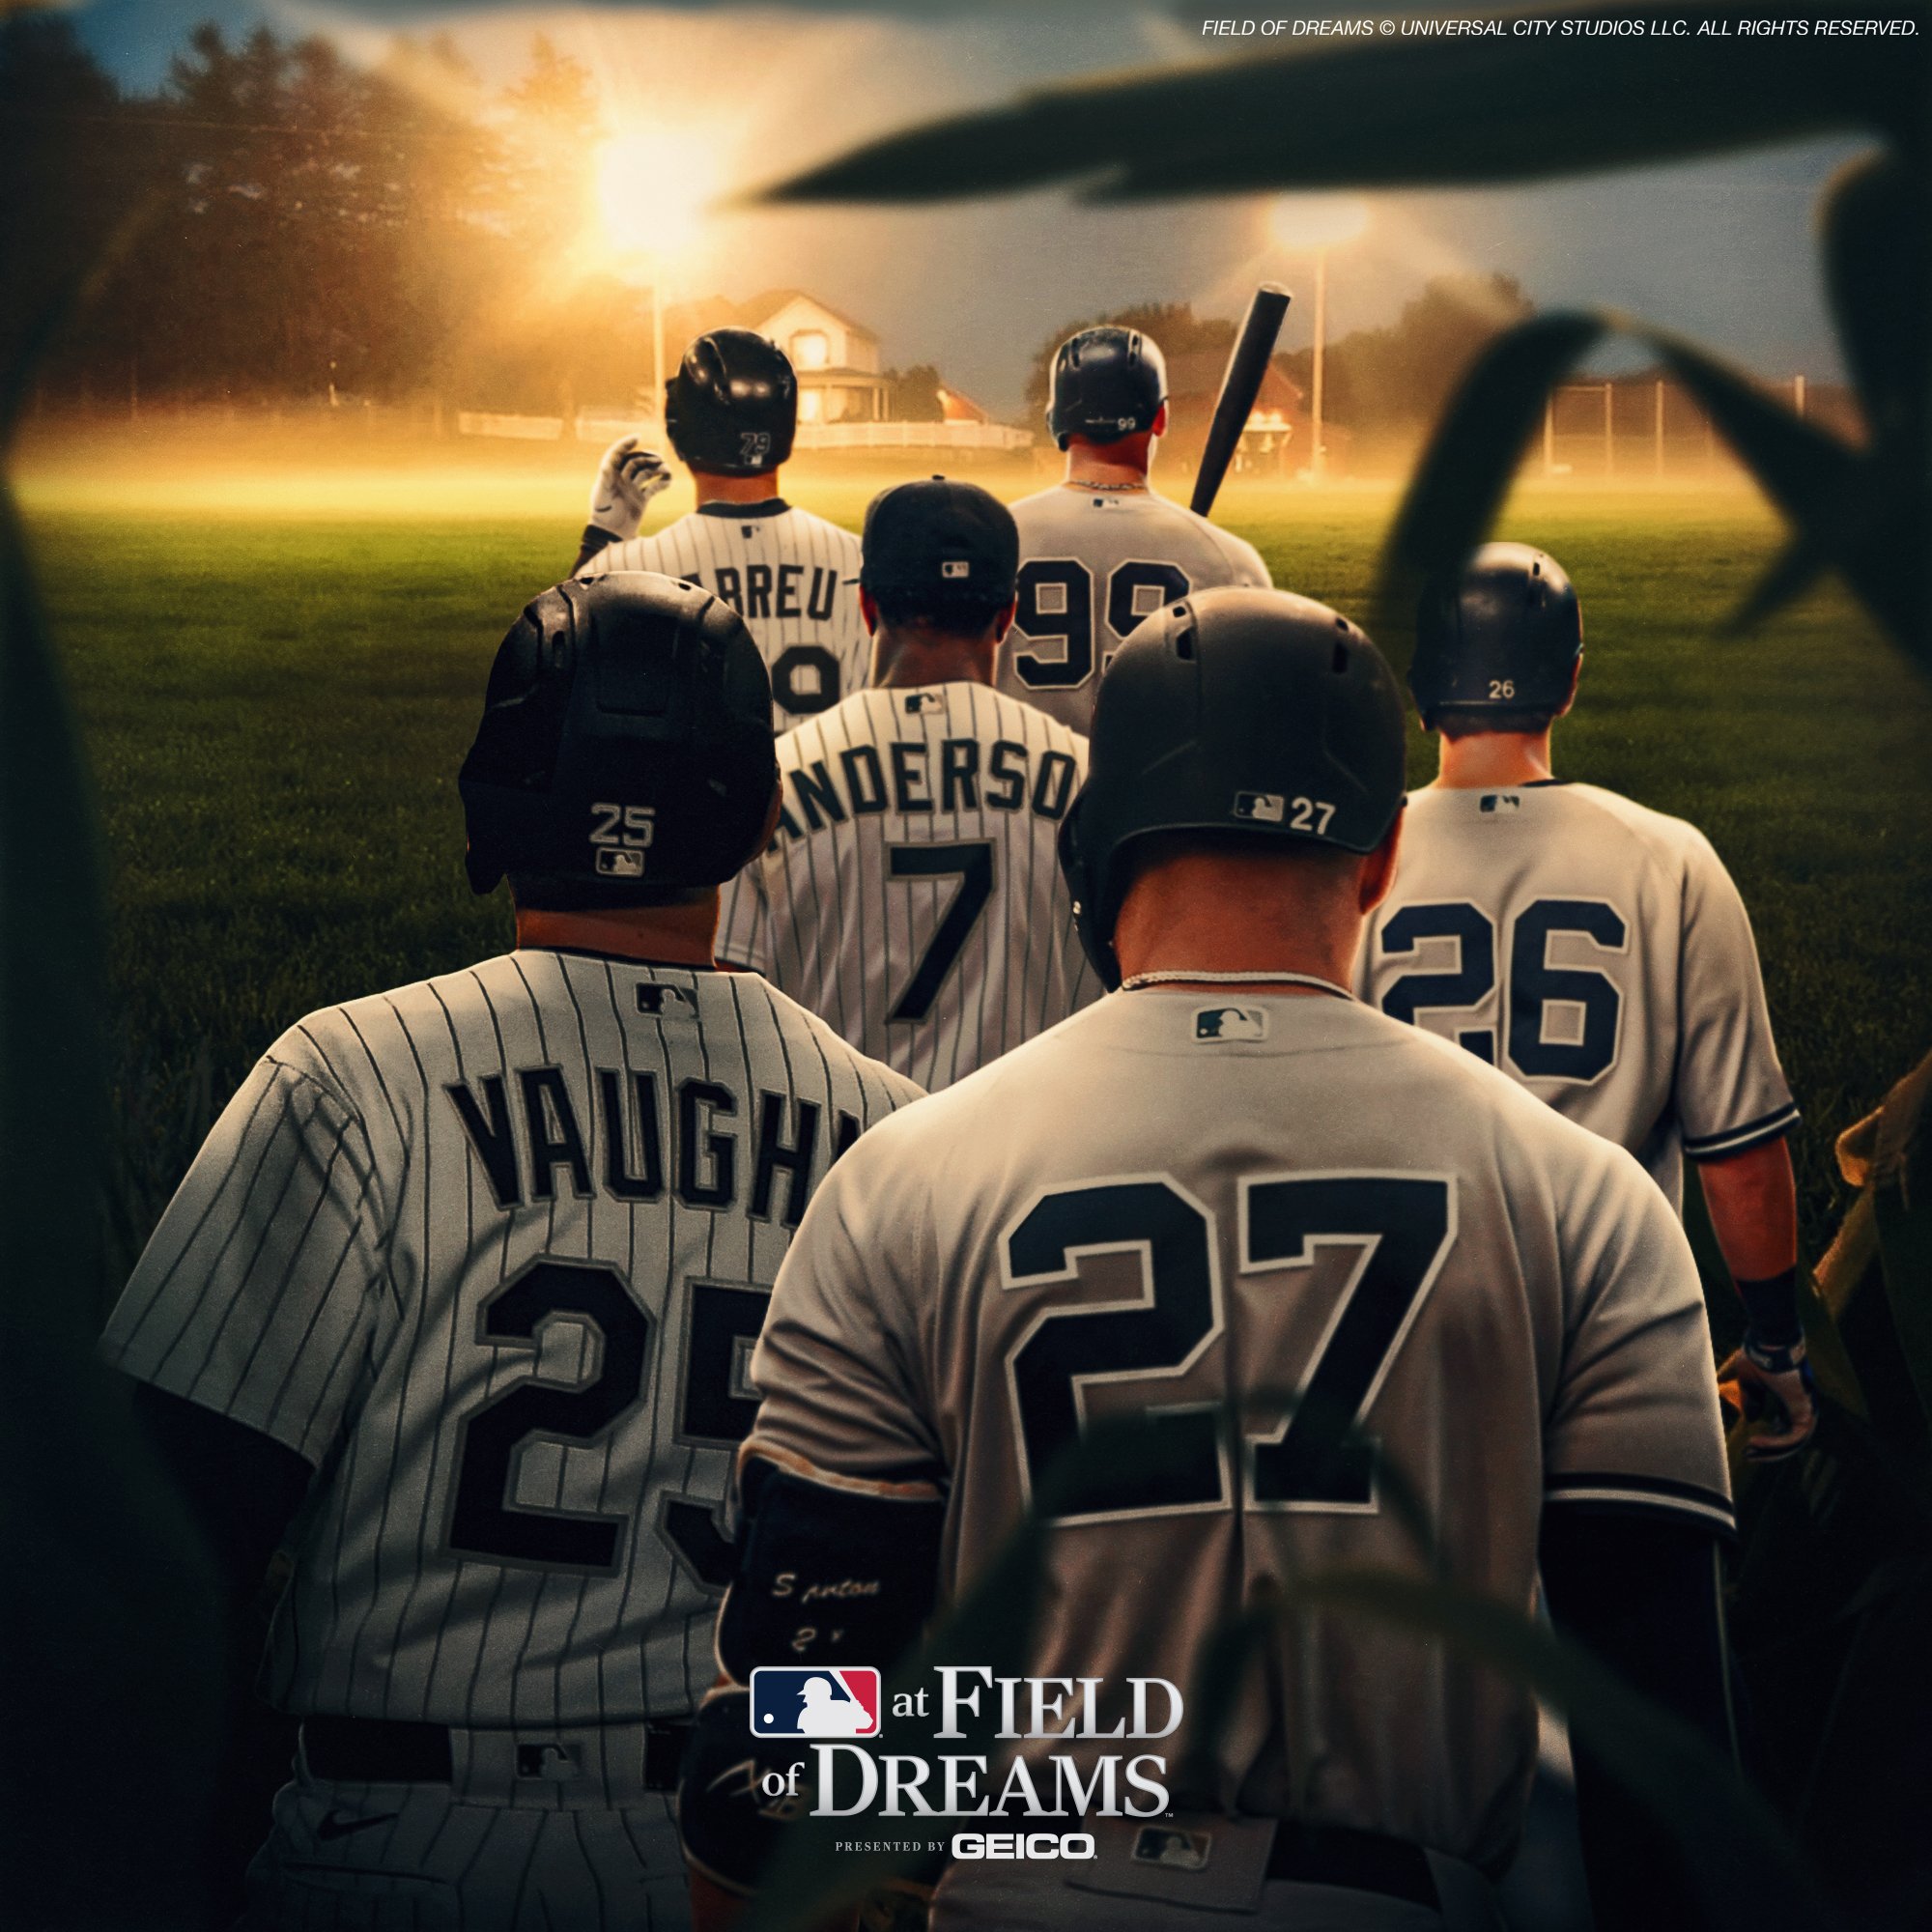 White Sox to play Yankees at Field of Dreams in Iowa